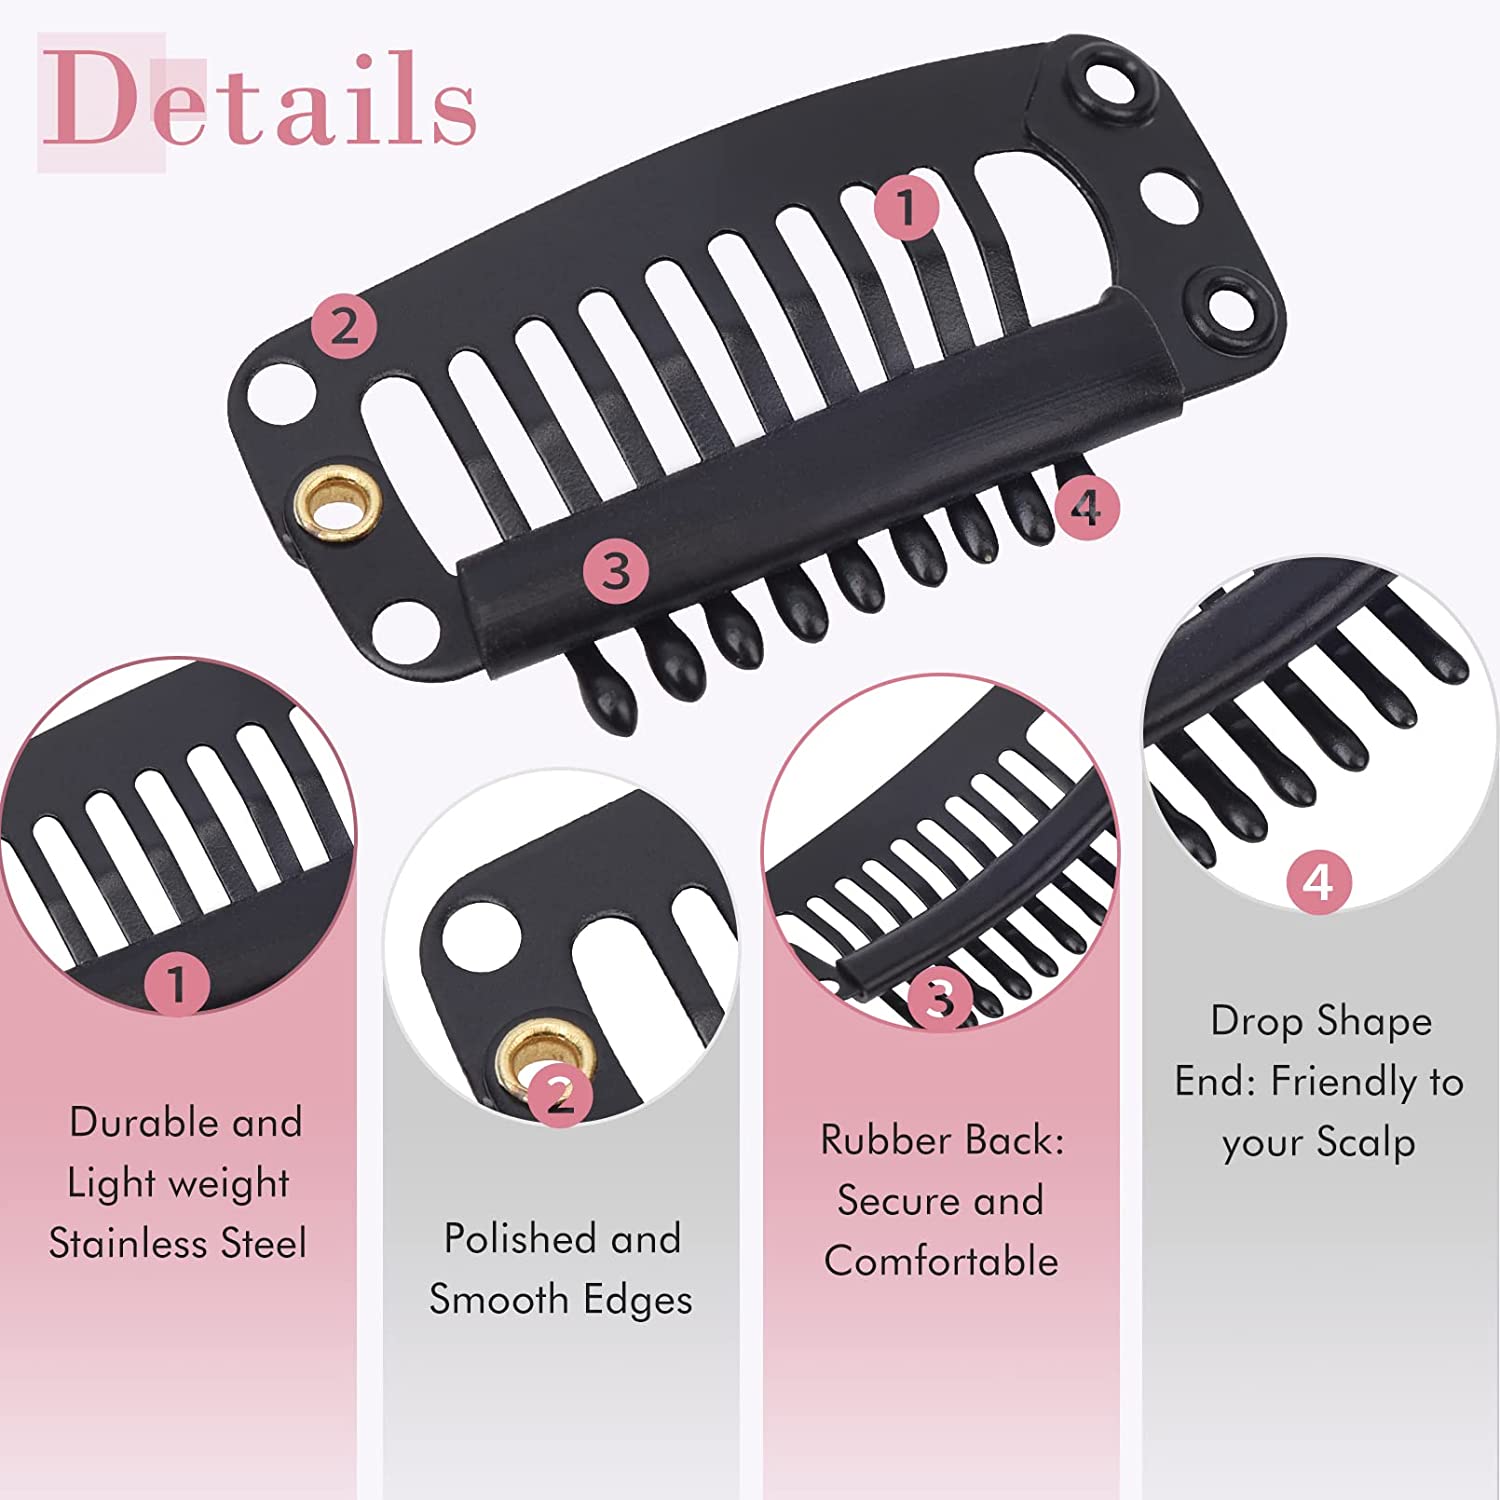 REECHO 24 pcs Hair Extension Clips, 31mm 9-Teeth Wig Clips for Extensions, Hairpieces, Wigs, Toupee with Rubber Silicone Back Snap Clips Wig Accessories